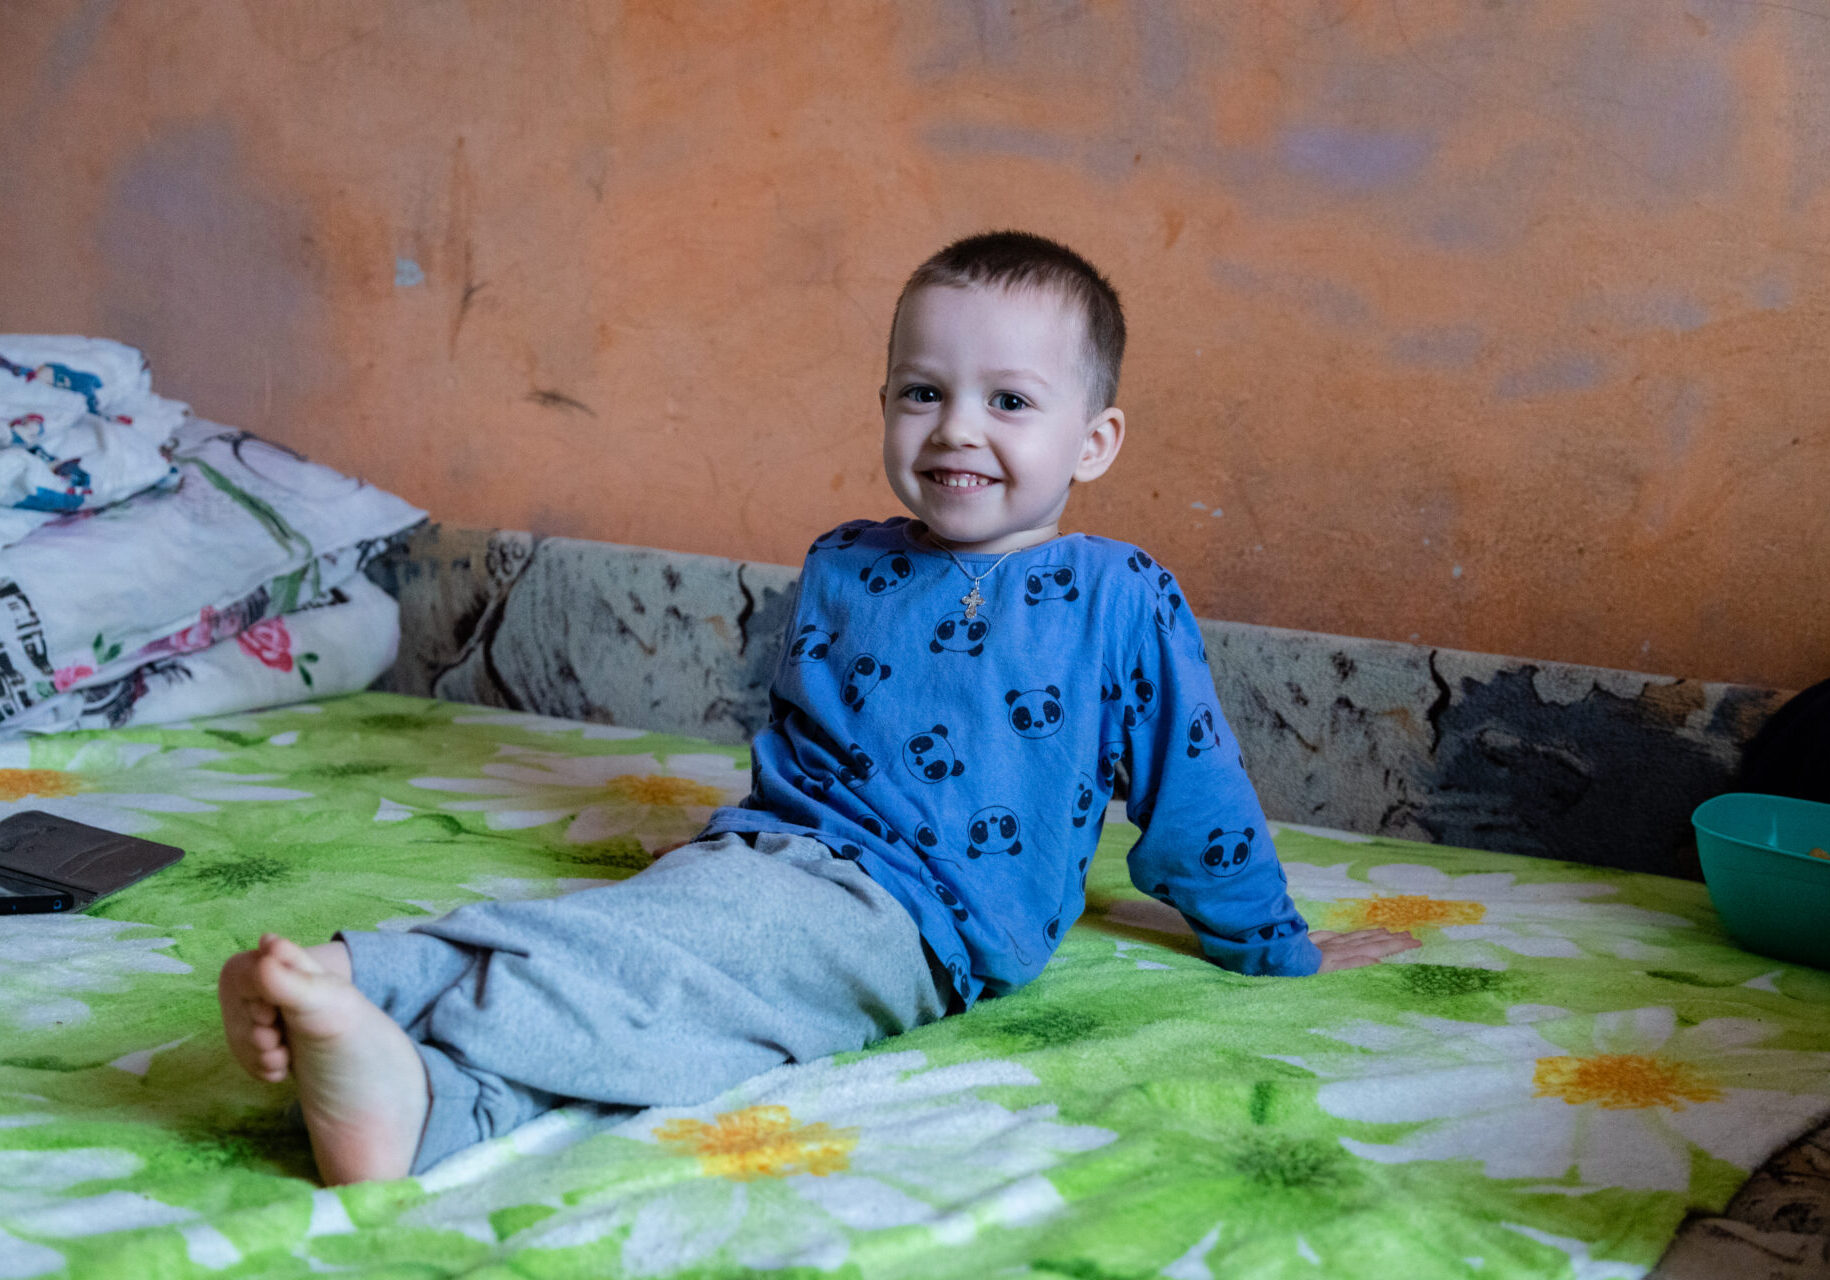 Serhiy has a blind father and a mother with a mild mental disorder. The family lives in a dormitory for the partially sighted and blind. They are supported by the Franciscans - they help with the necessary things.